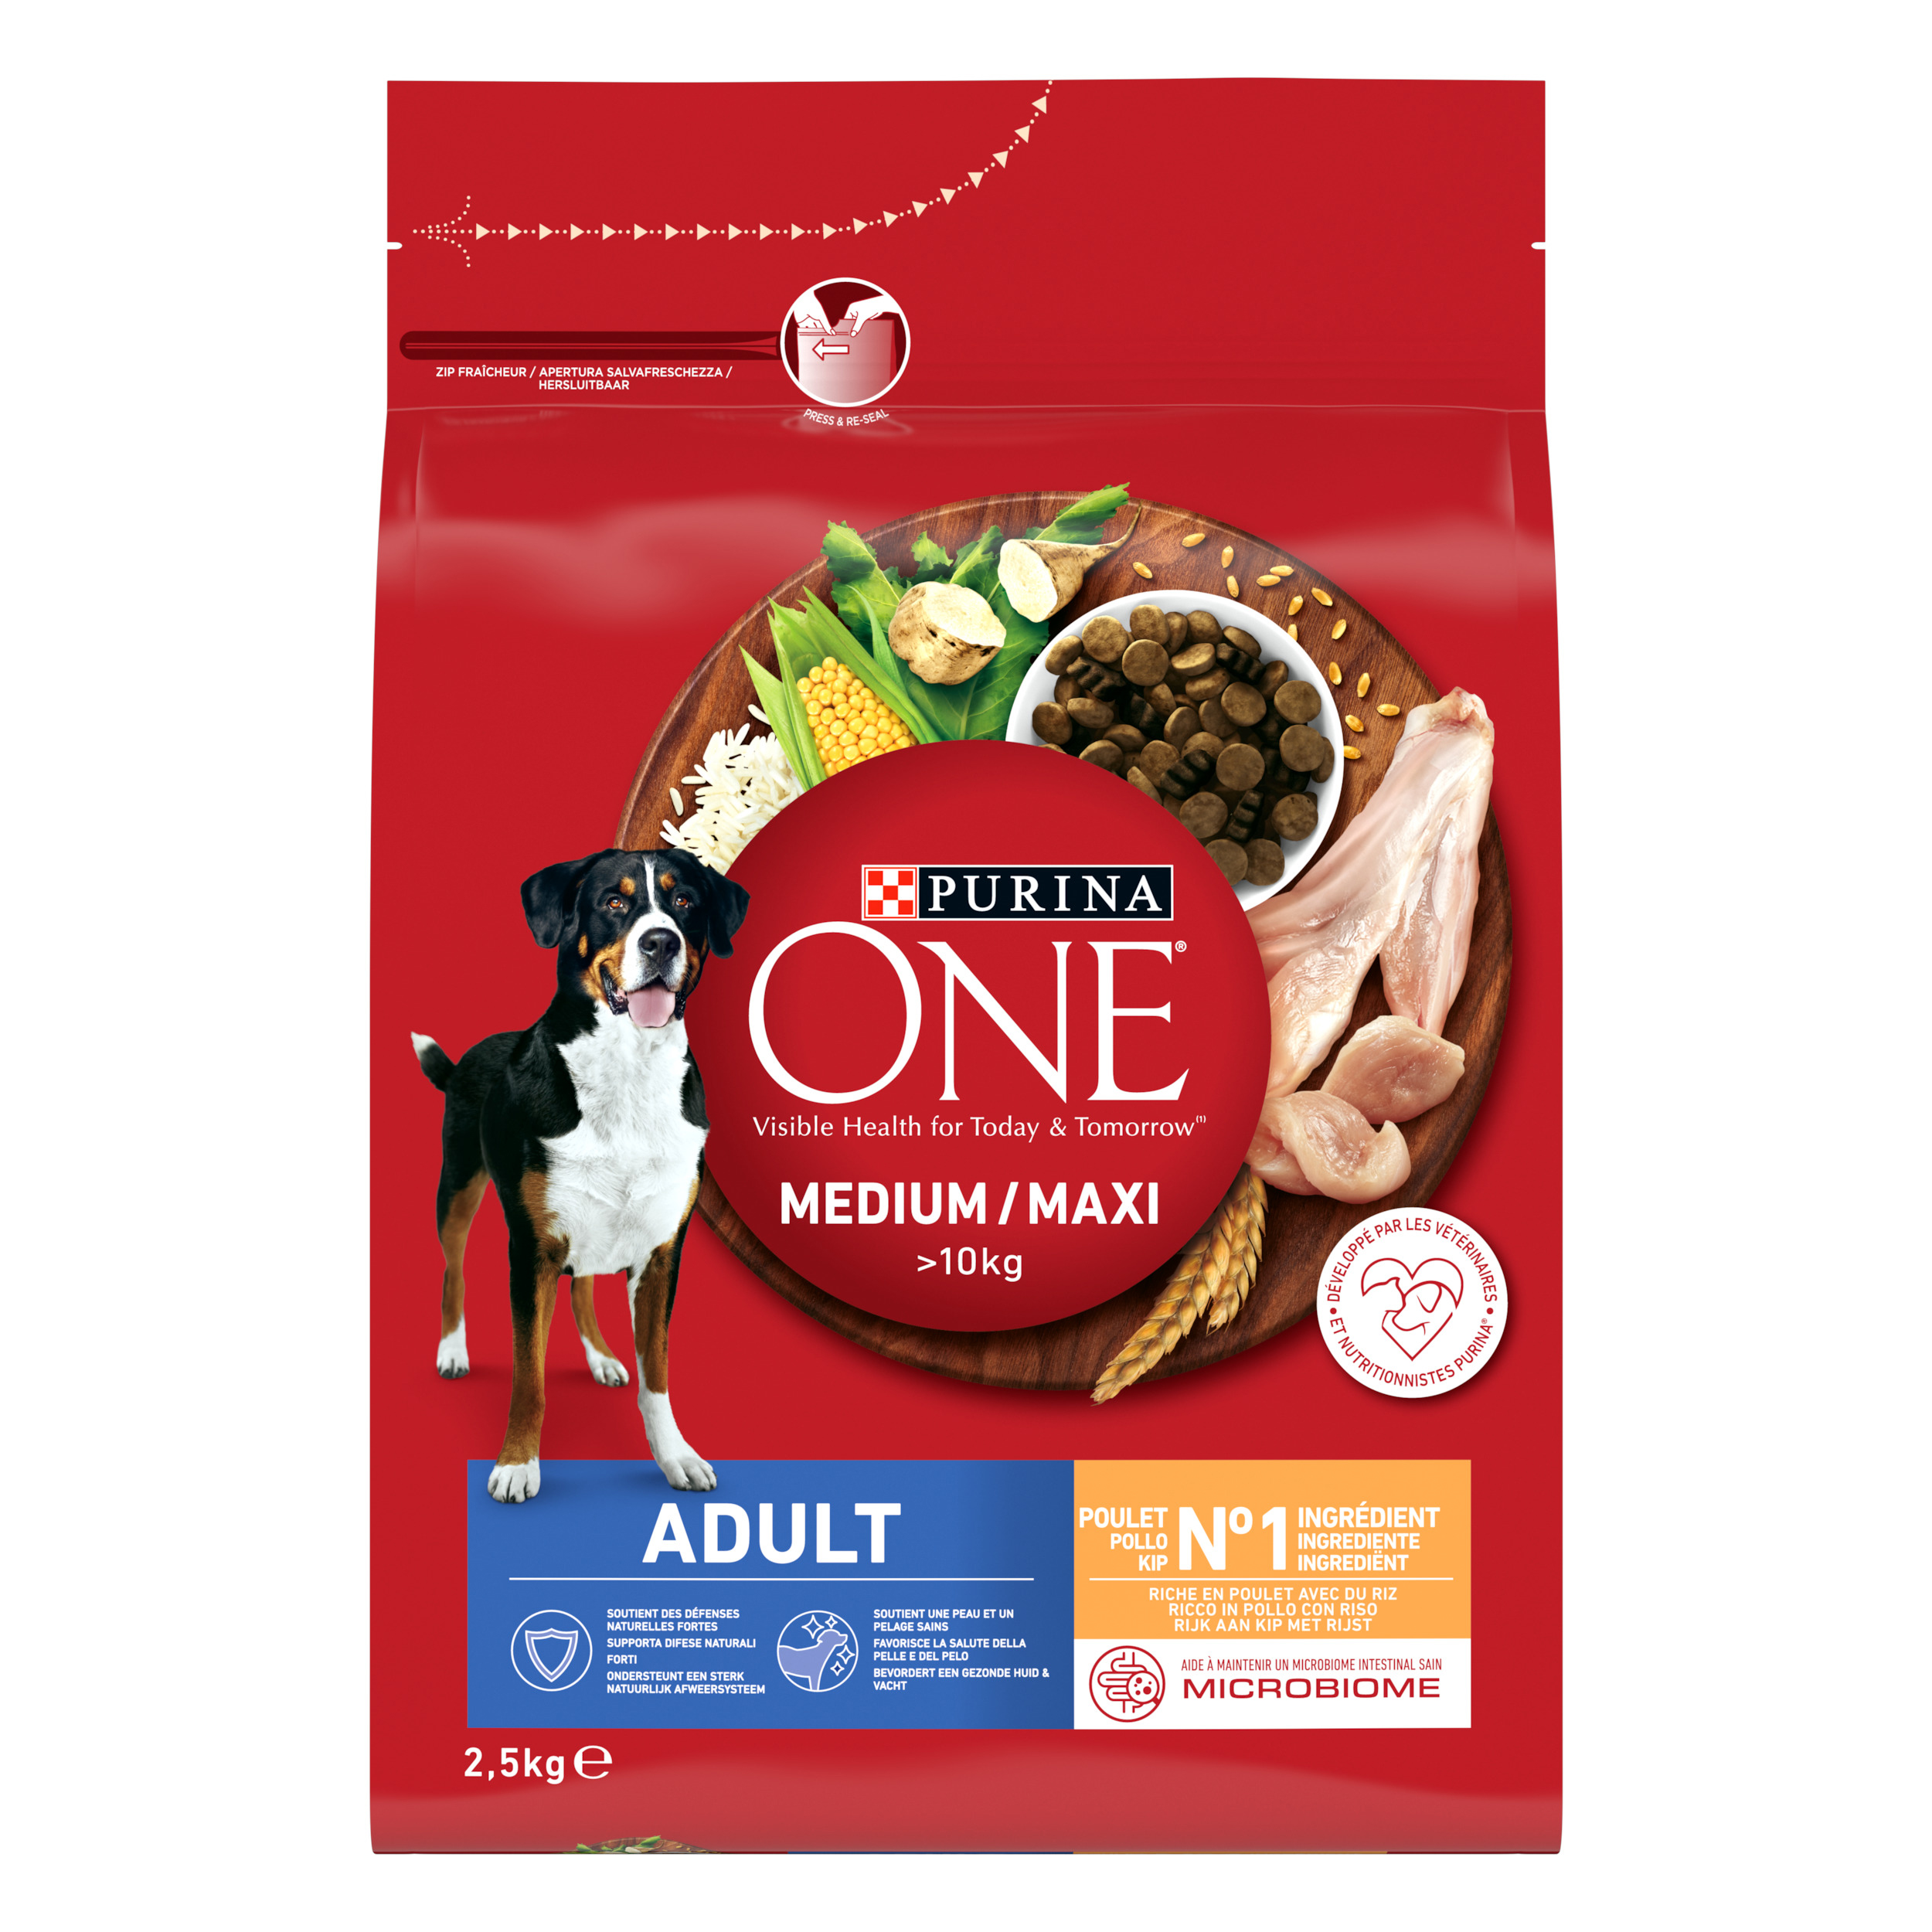 Purina ONE Chicken & Rice Dry Food for Medium & Maxi Adult Dogs 2.5kg